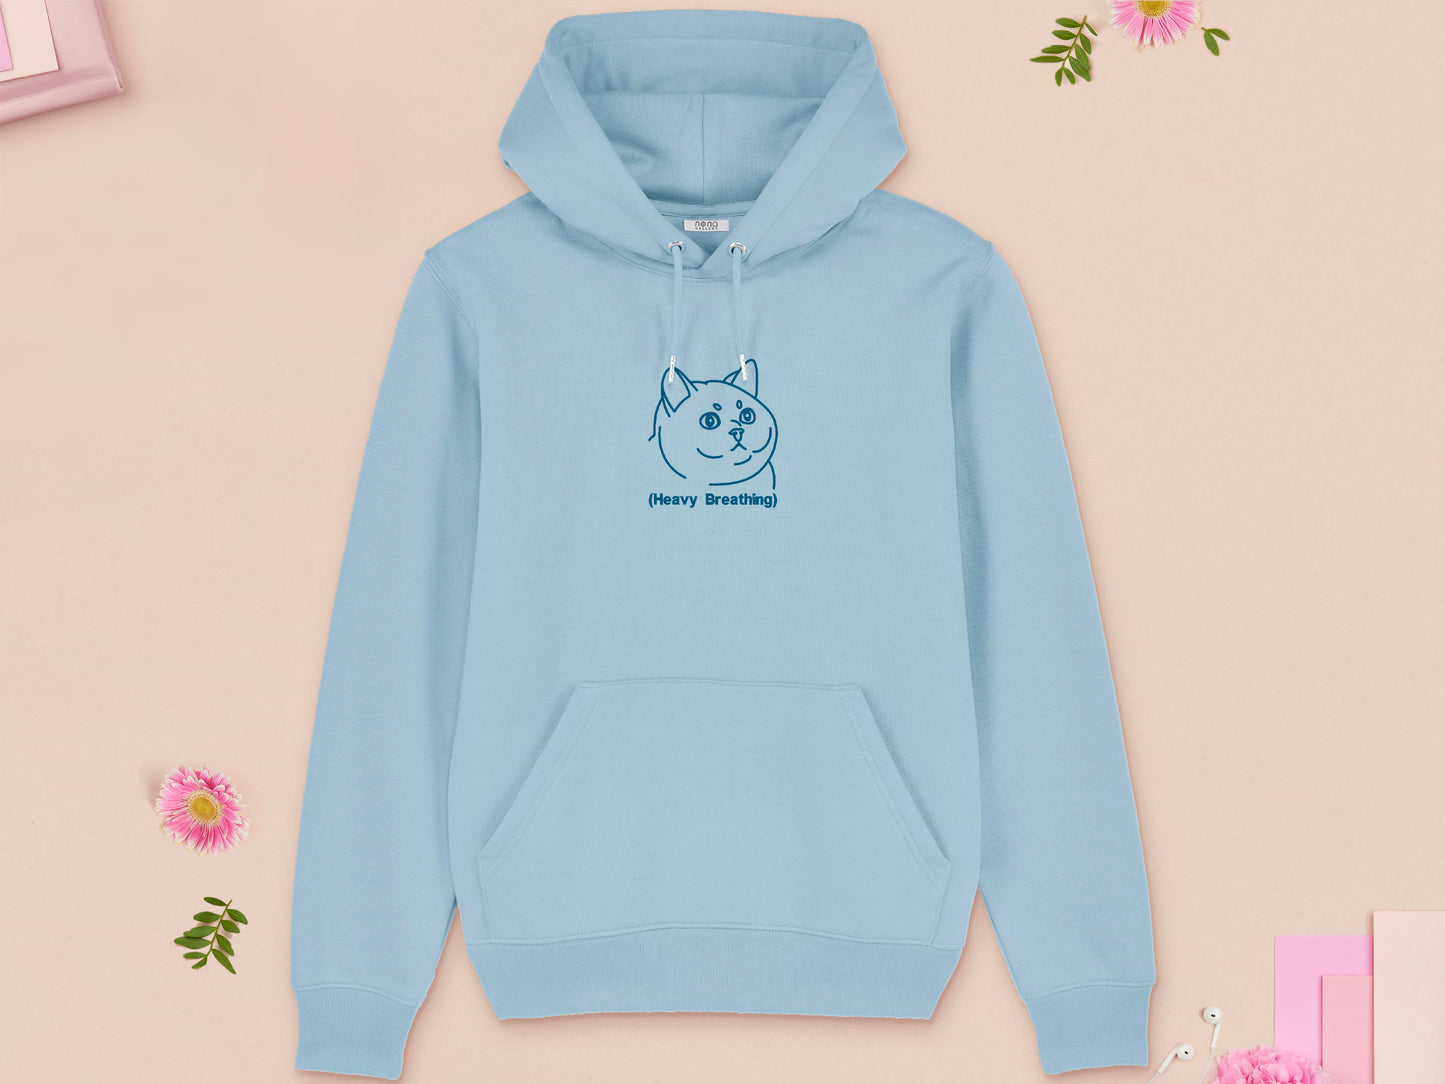 A blue long sleeve fleece hoodie, with an embroidered blue thread design of cute fat cat portrait with text underneath saying (Heavy Breathing)